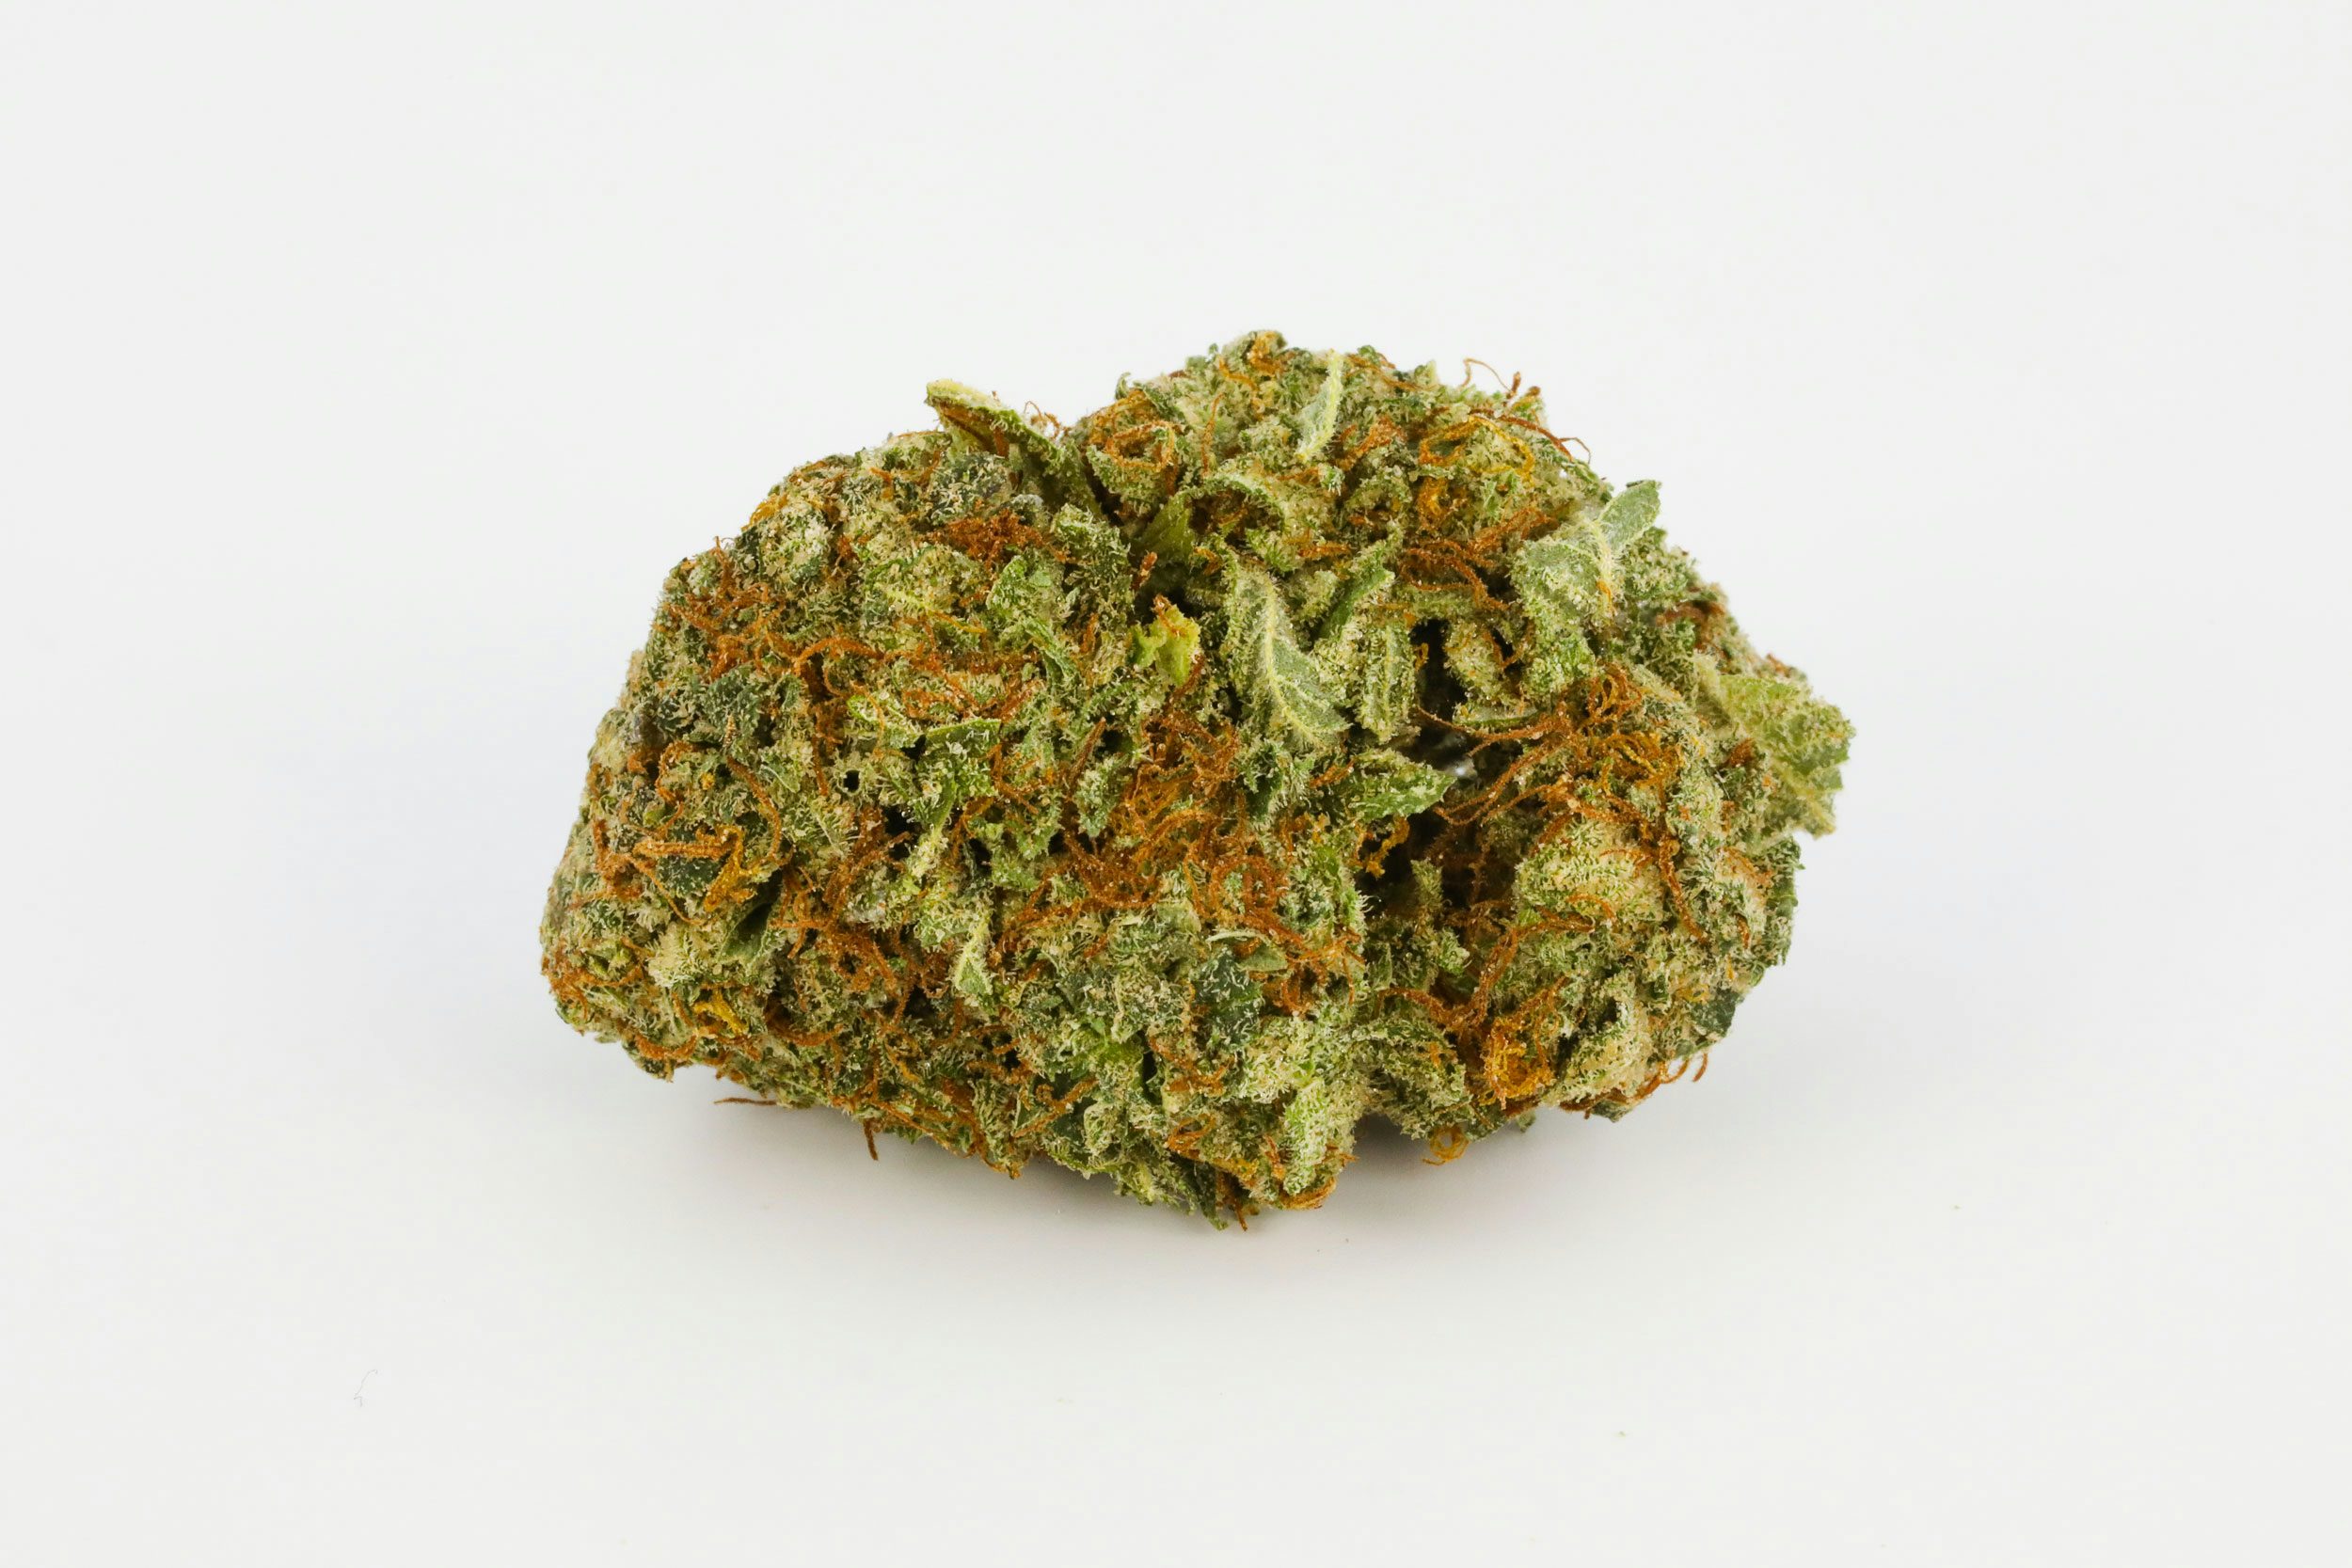 Best Star Wars Strains To Take You To A Galaxy Far Far Away Best Star Wars Strains To Take You To A Galaxy Far, Far Away